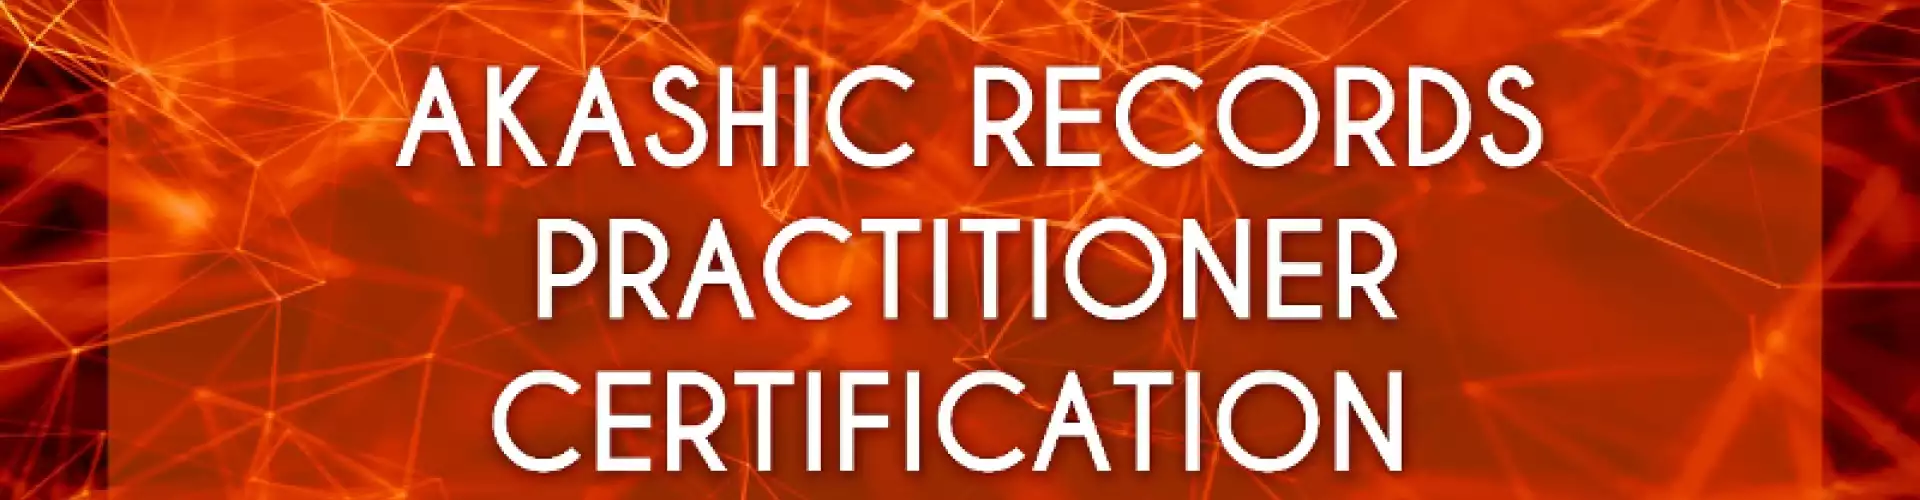 Akashic Records Practitioner Certification - October 16, 2020 - Amy Mak